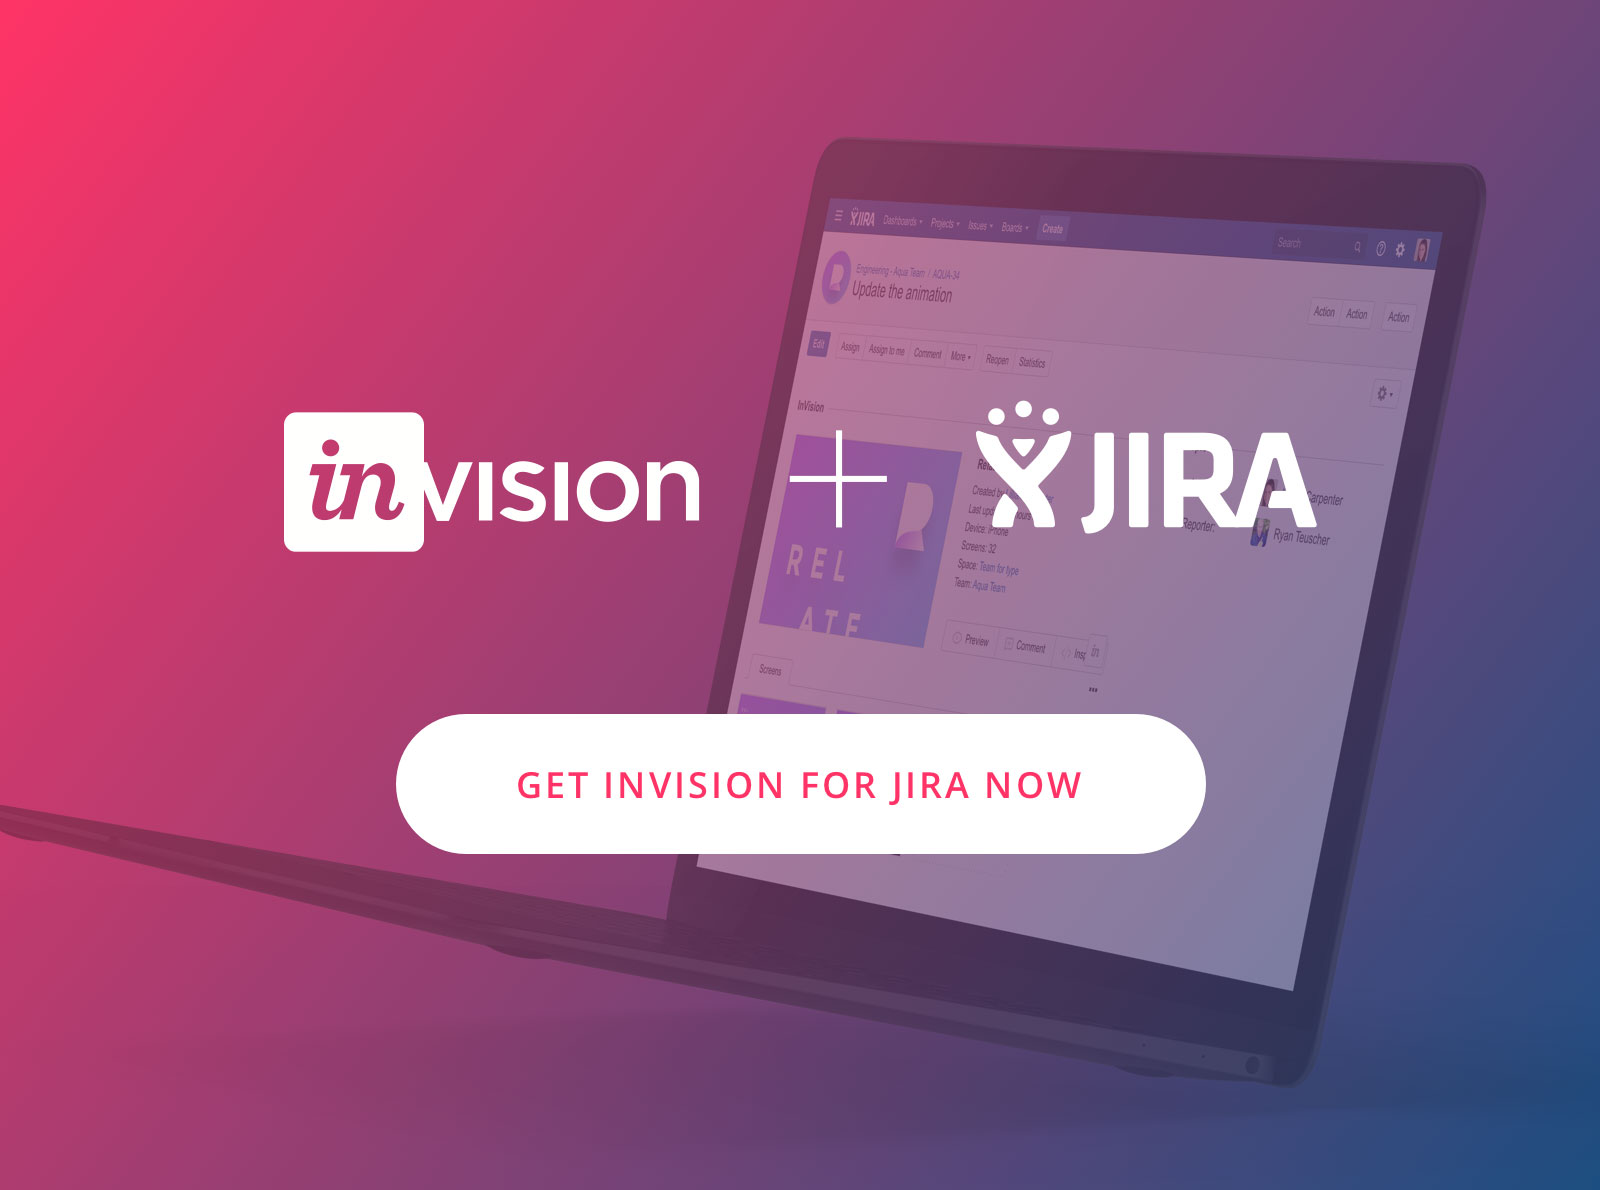 Introducing Invision for JIRA